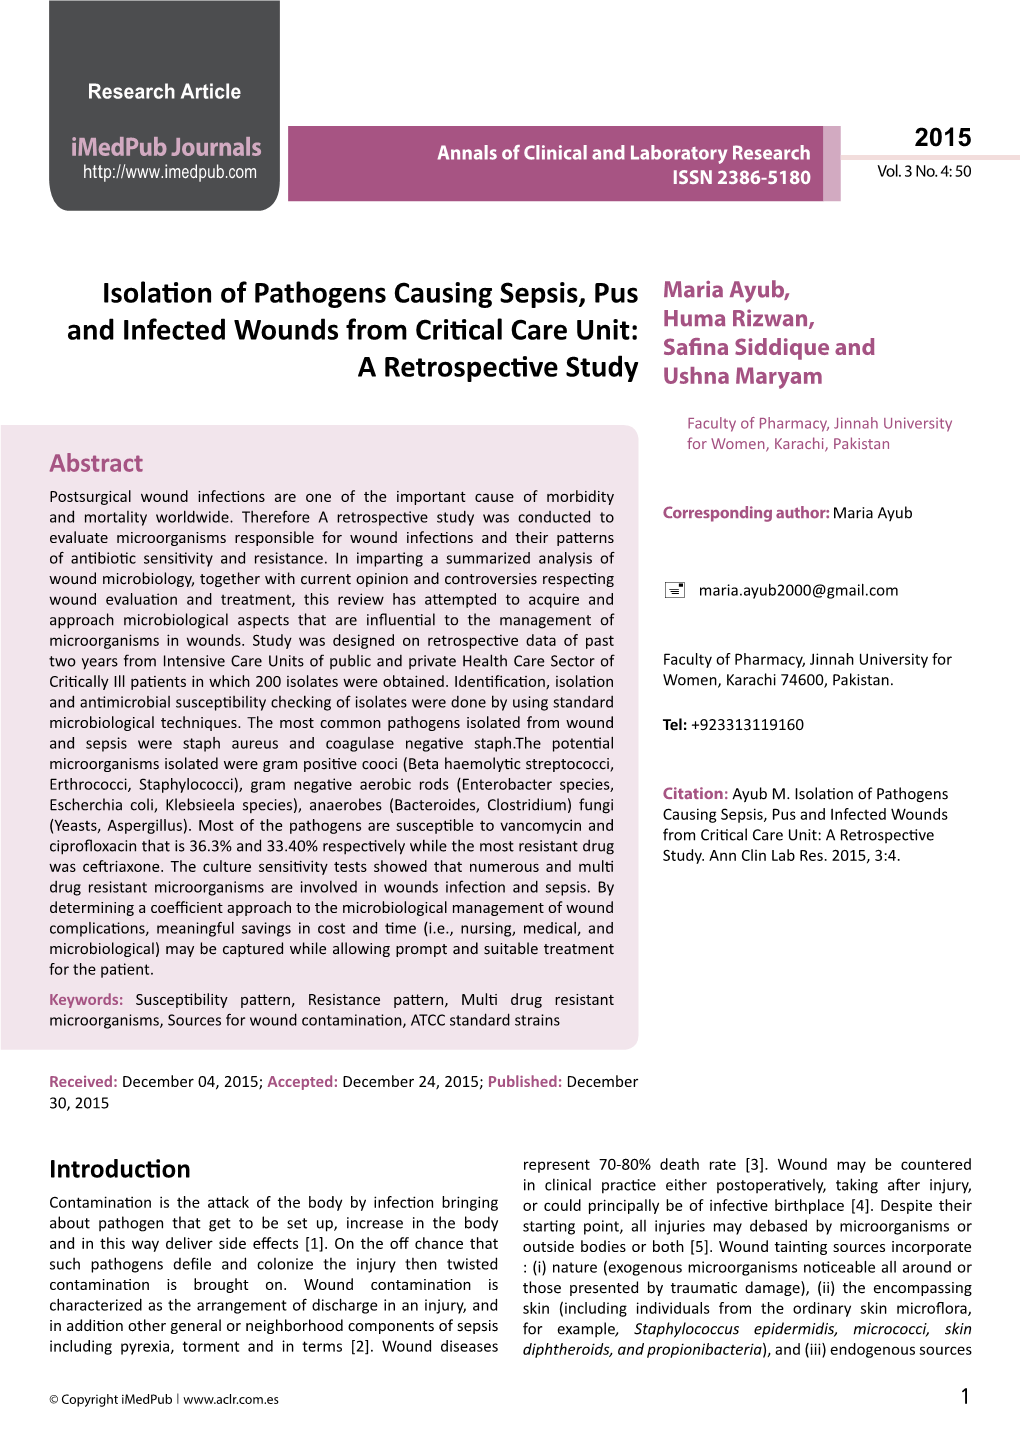 Isolation of Pathogens Causing Sepsis, Pus and Infected Wounds